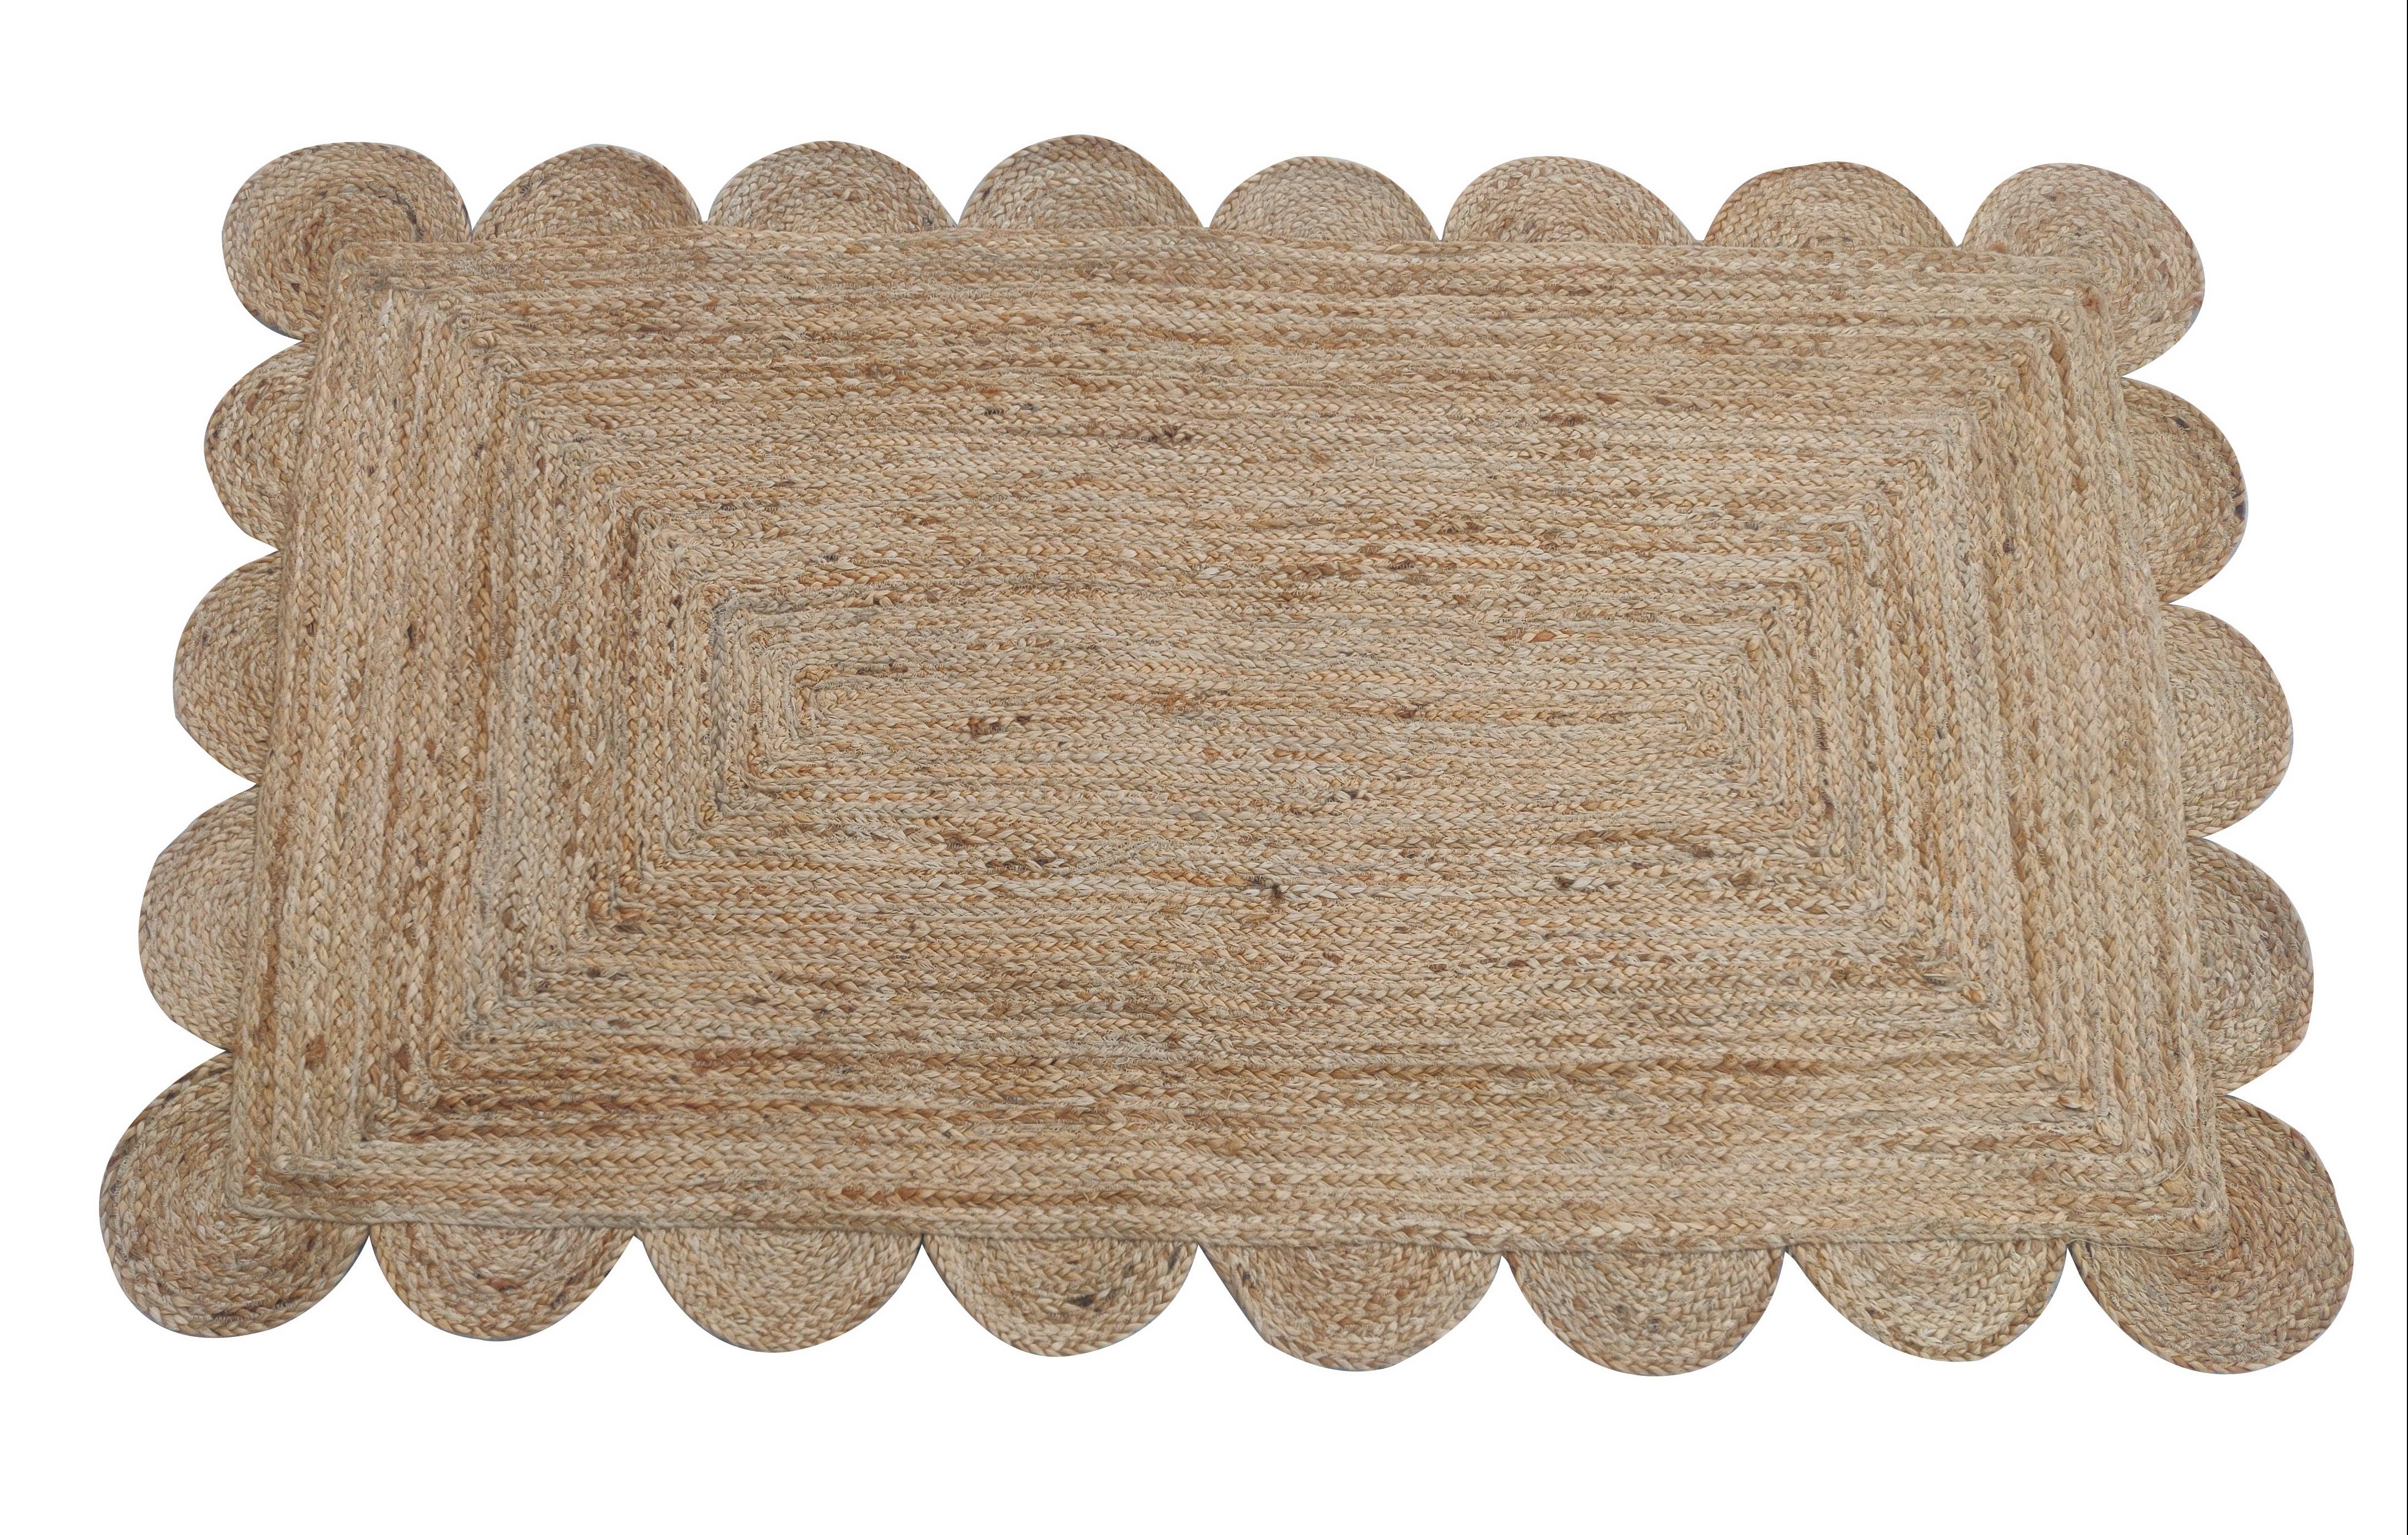 Hand-Woven Handmade Jute Area Flat Weave Rug, 3x5 Solid Jute Scalloped Indian Dhurrie Rug For Sale